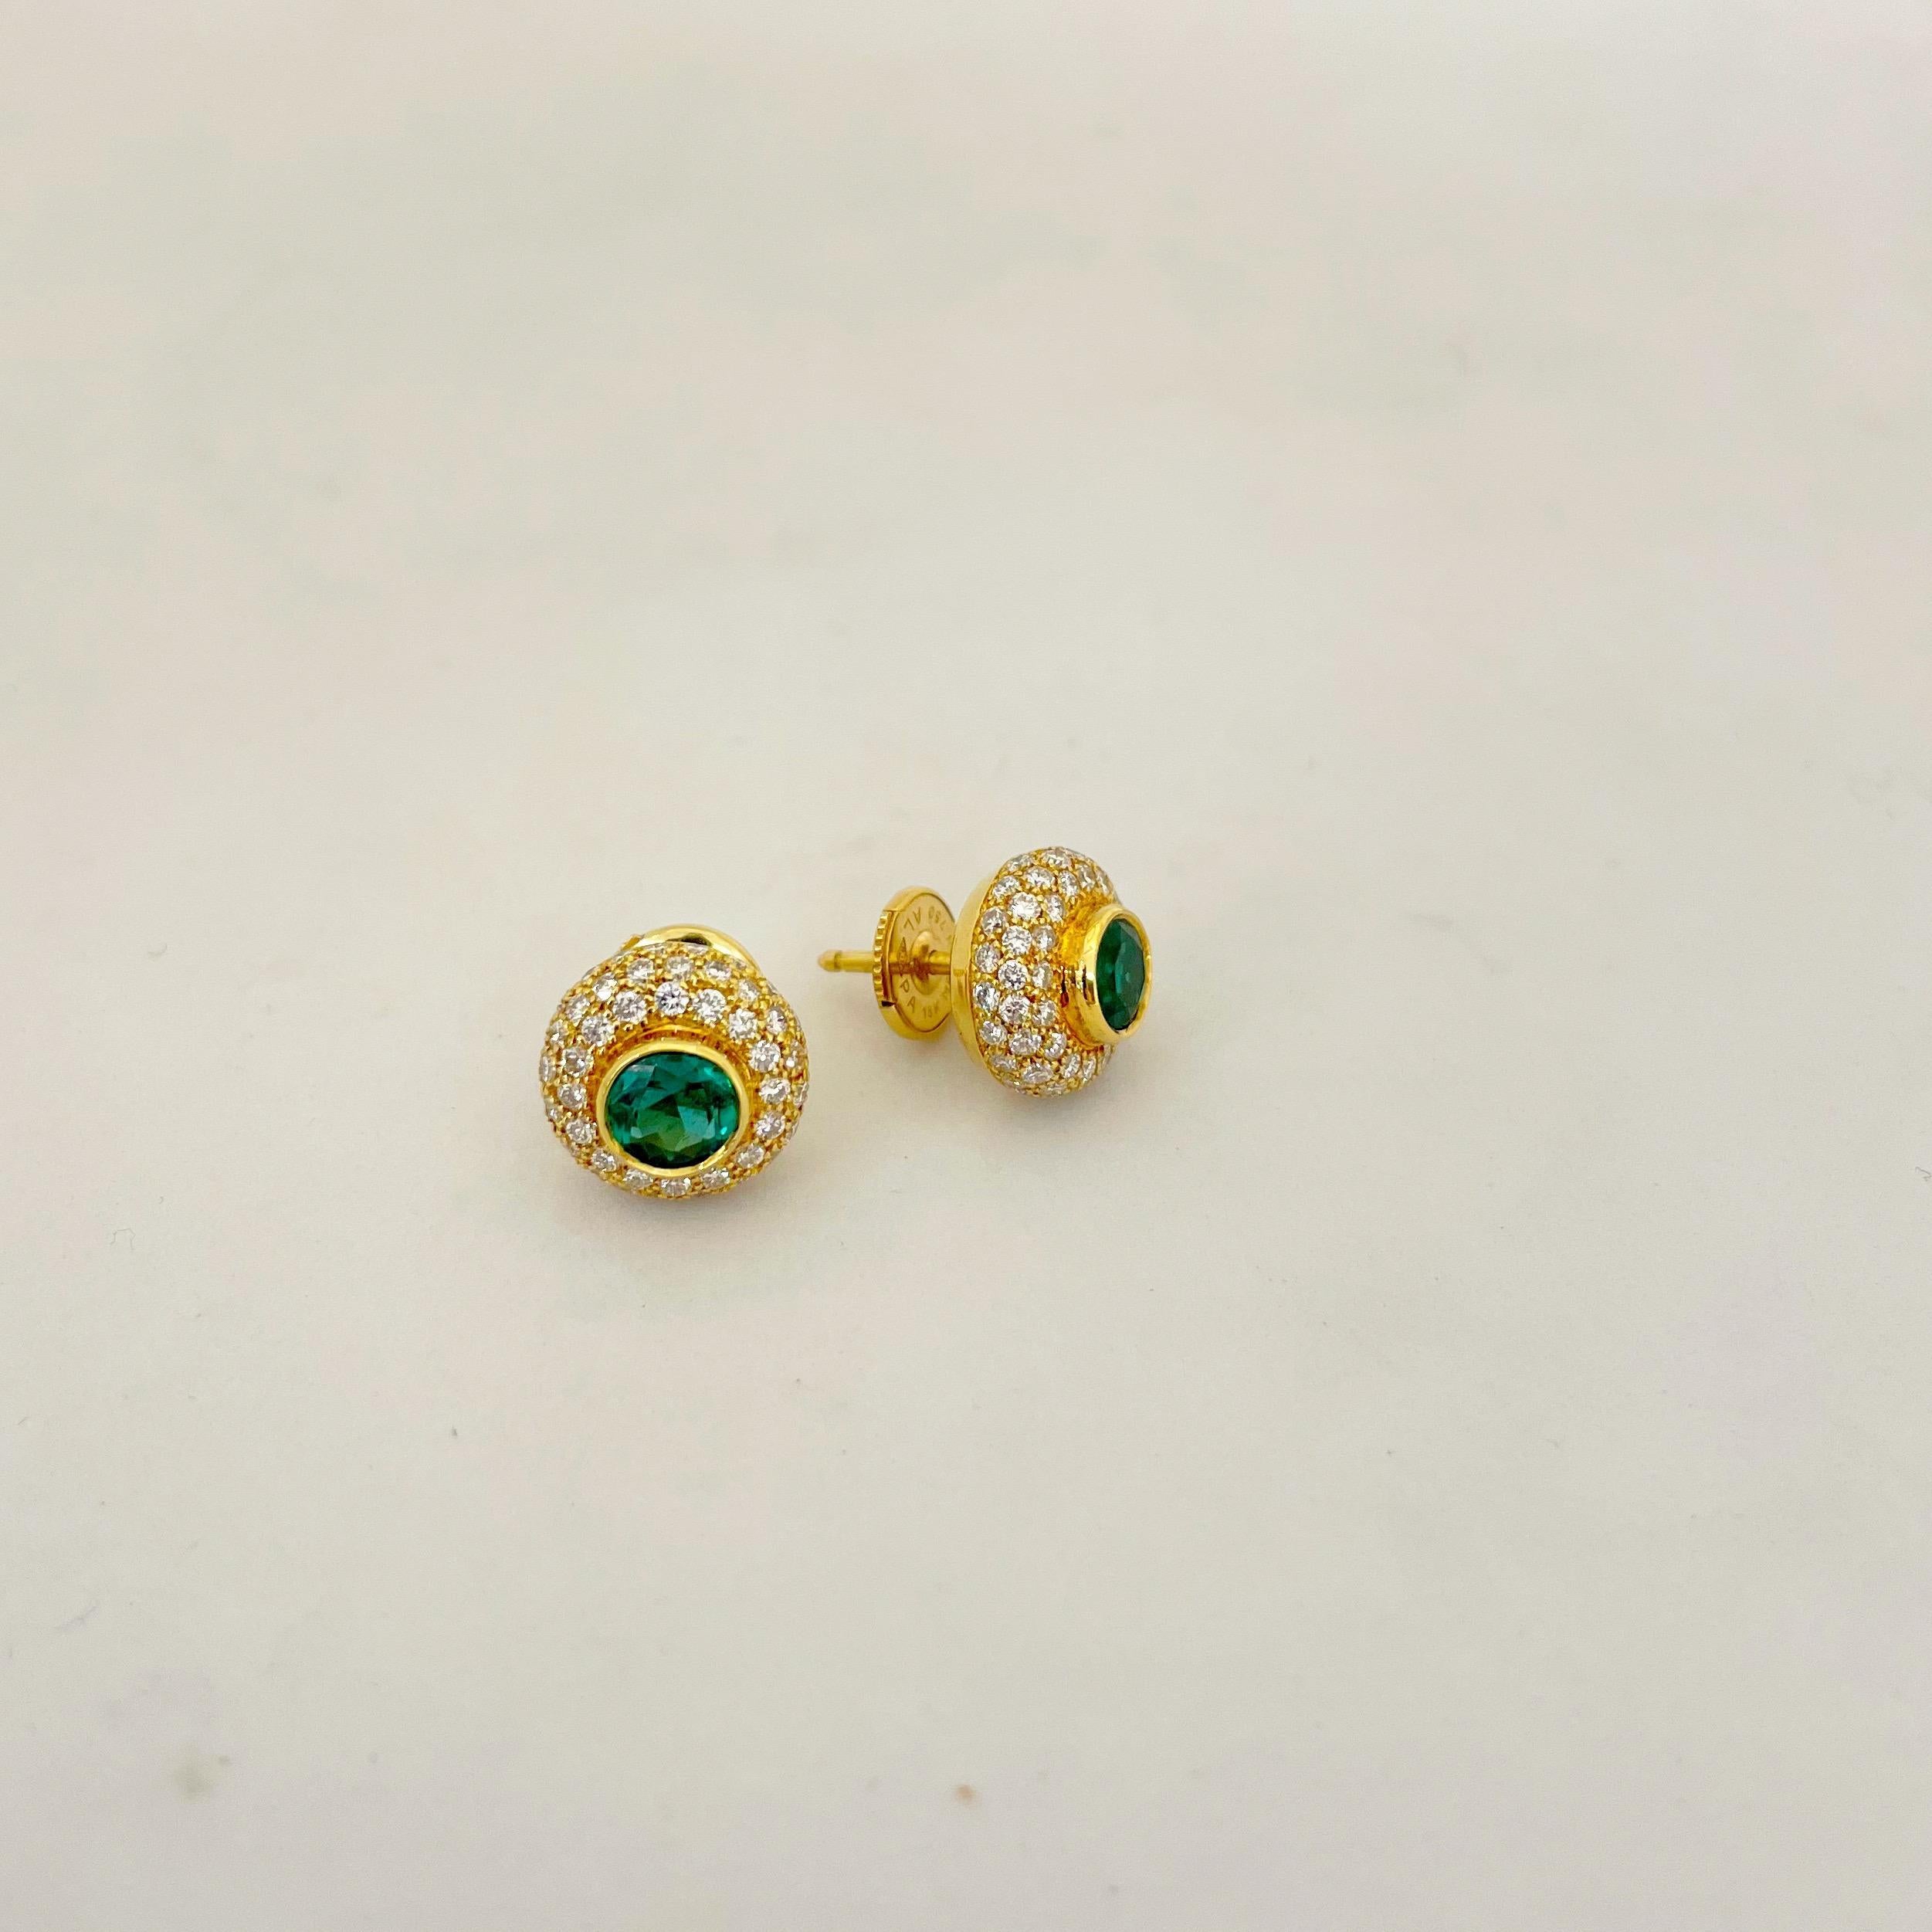 These beautiful studs feature 0.98cts of round green emeralds bezel set in 18kt yellow gold among 1.37cts of white round brilliant pave diamonds. 
These unique studs are easy to wear both day and night, casual or dressy.
Signed Linderman